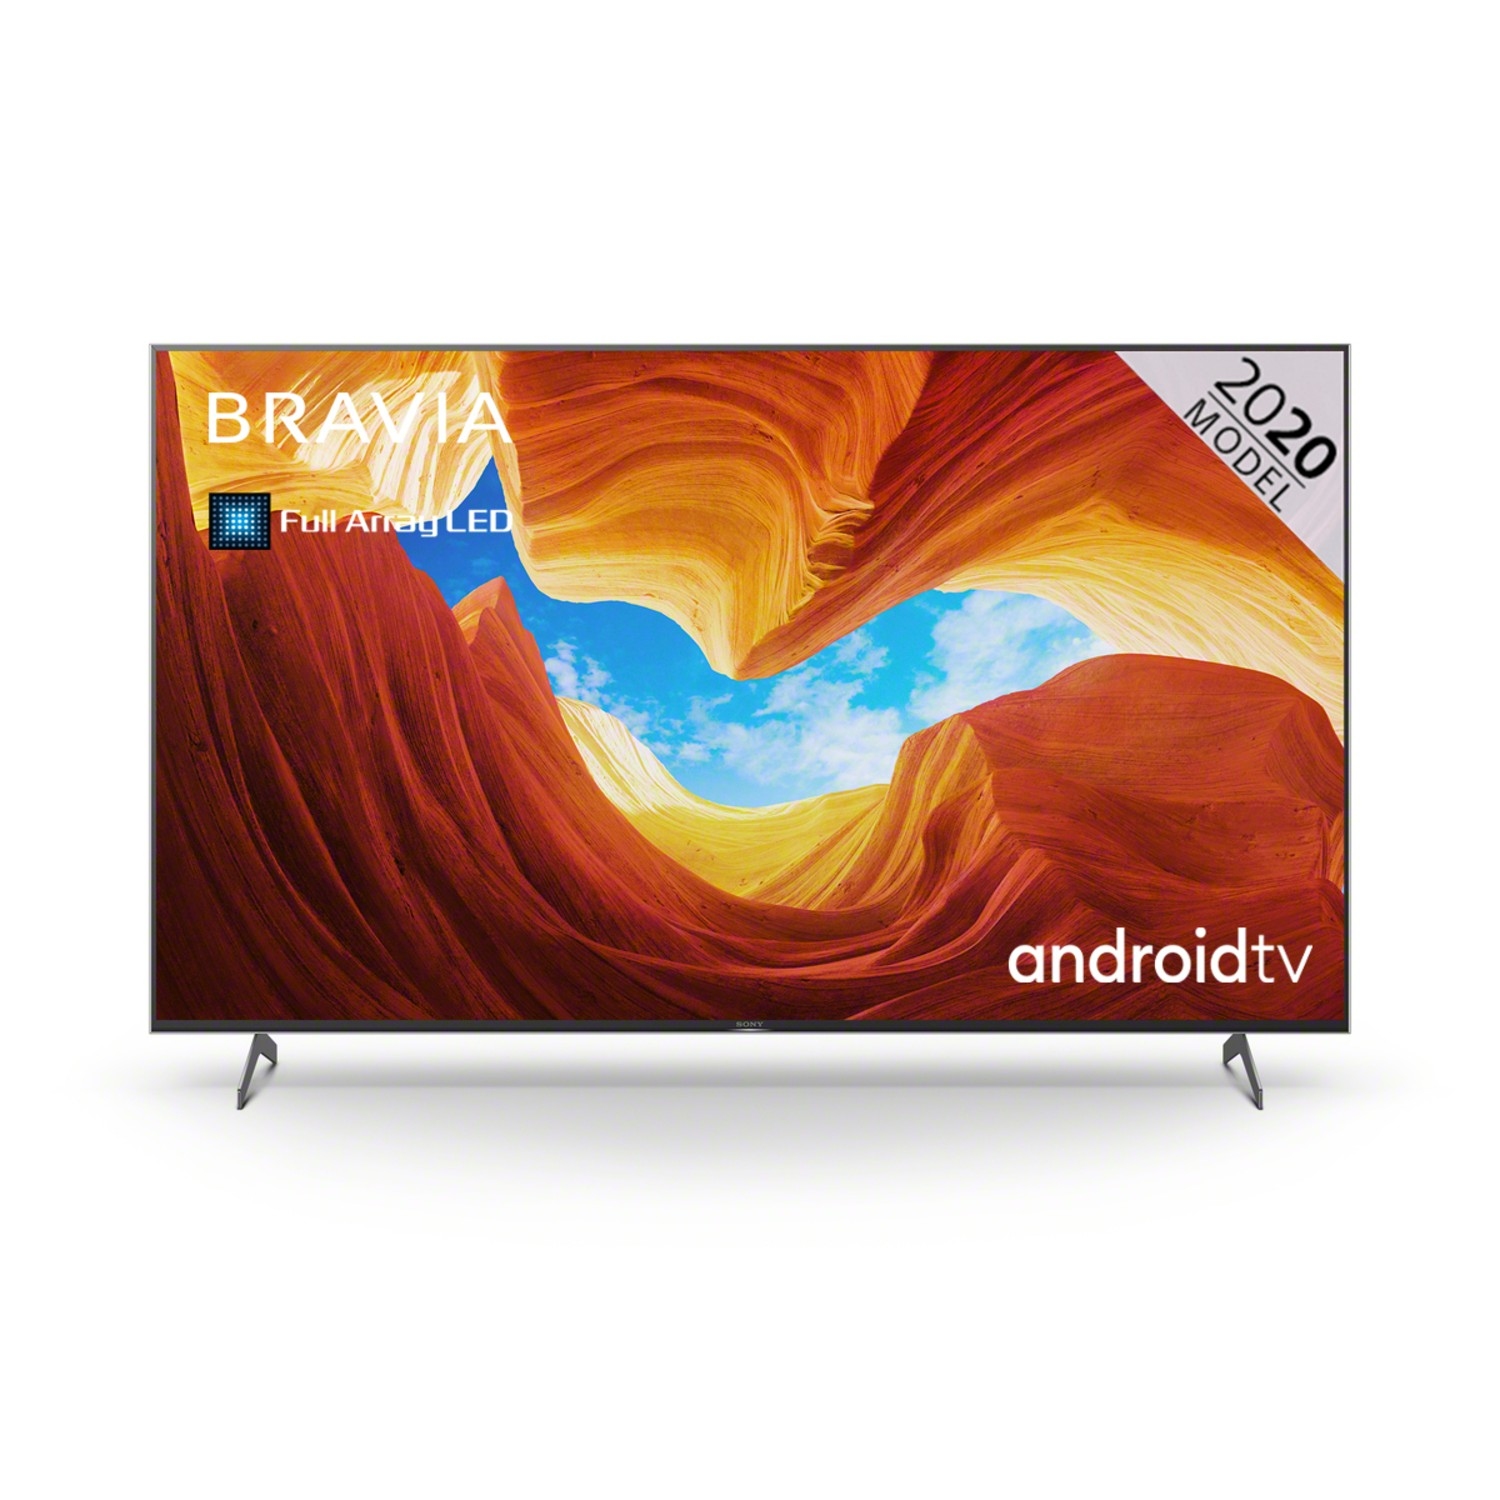 Sony KE75XH9005BU 75" 4K HDR Full Array LED Android TV with X-Motion Clarity &amp; Google Assistant - 0